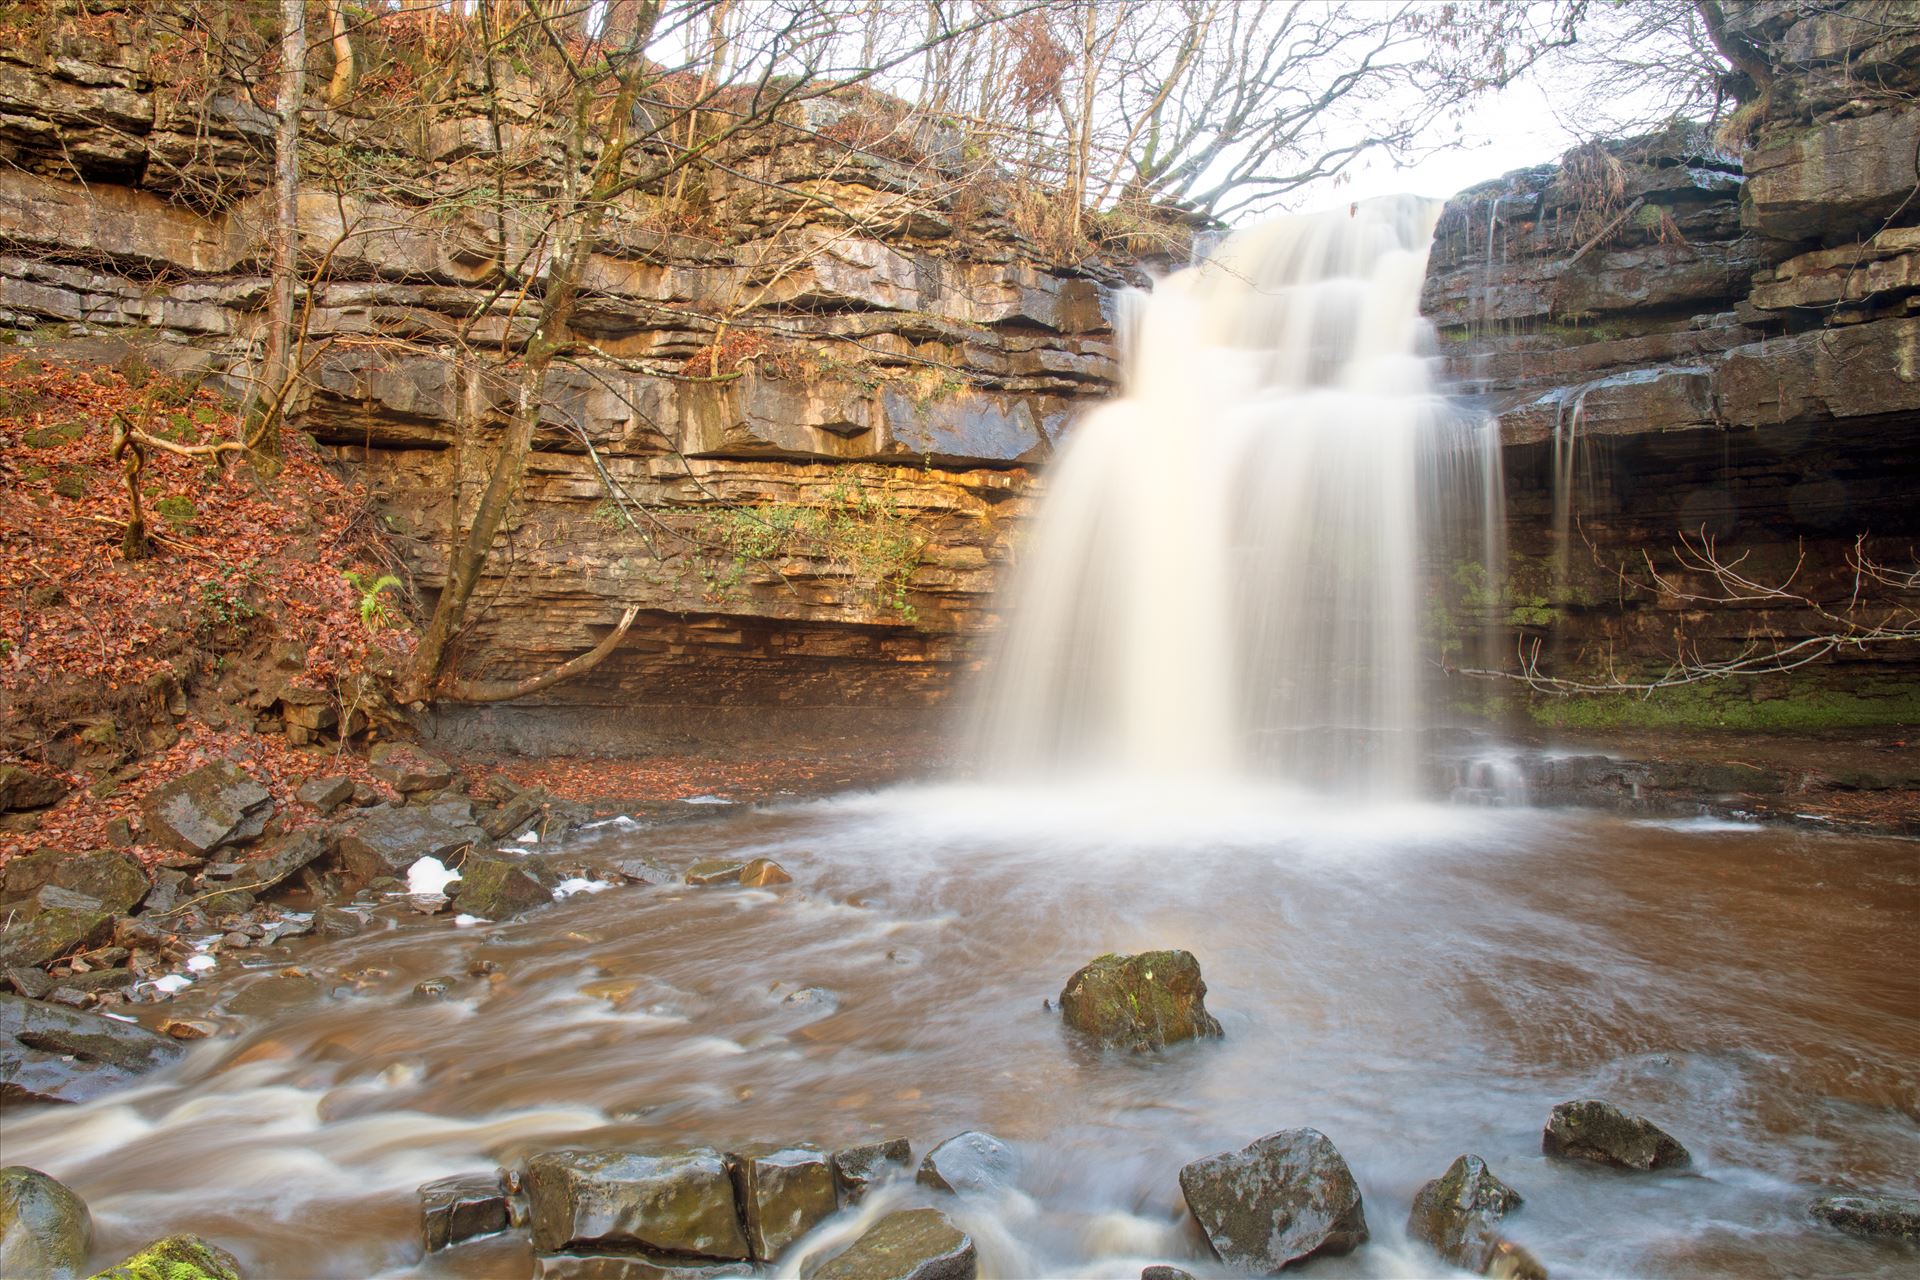 Summerhill Force Summerhill Force is a picturesque waterfall in a wooded glade near Bowlees in Upper Teesdale. by philreay